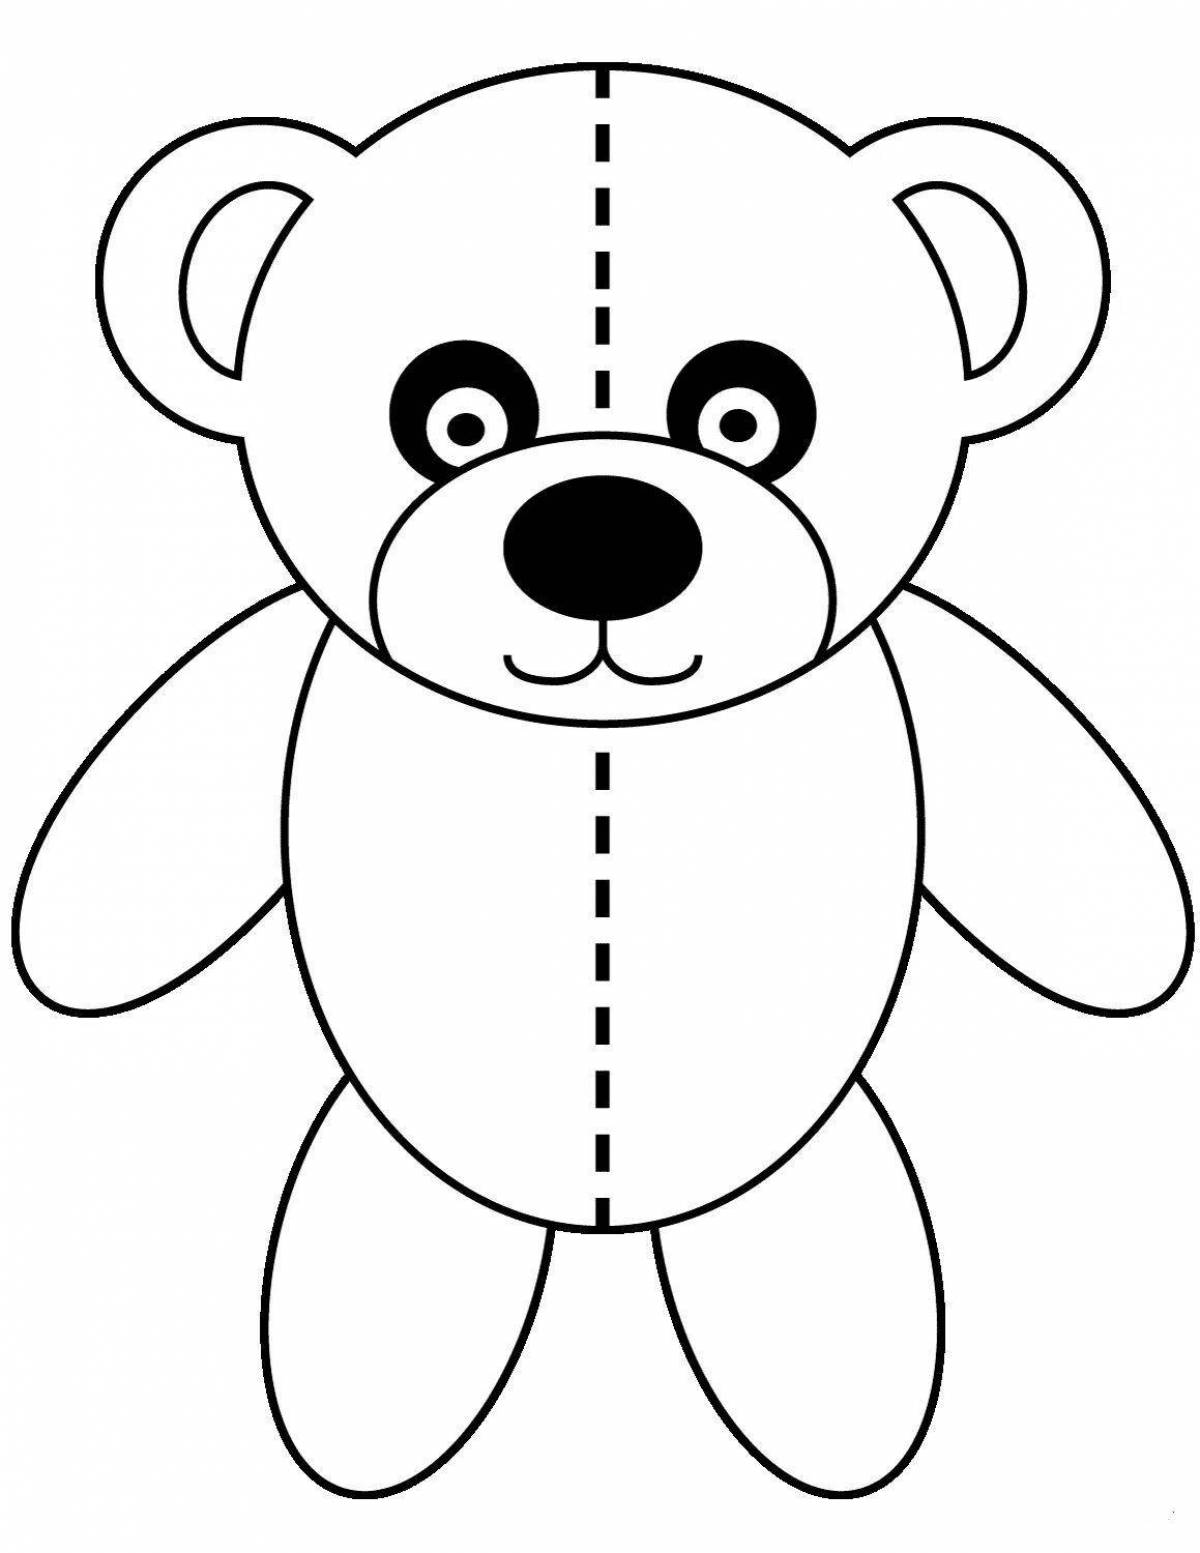 Cute teddy bear coloring book for 3-4 year olds